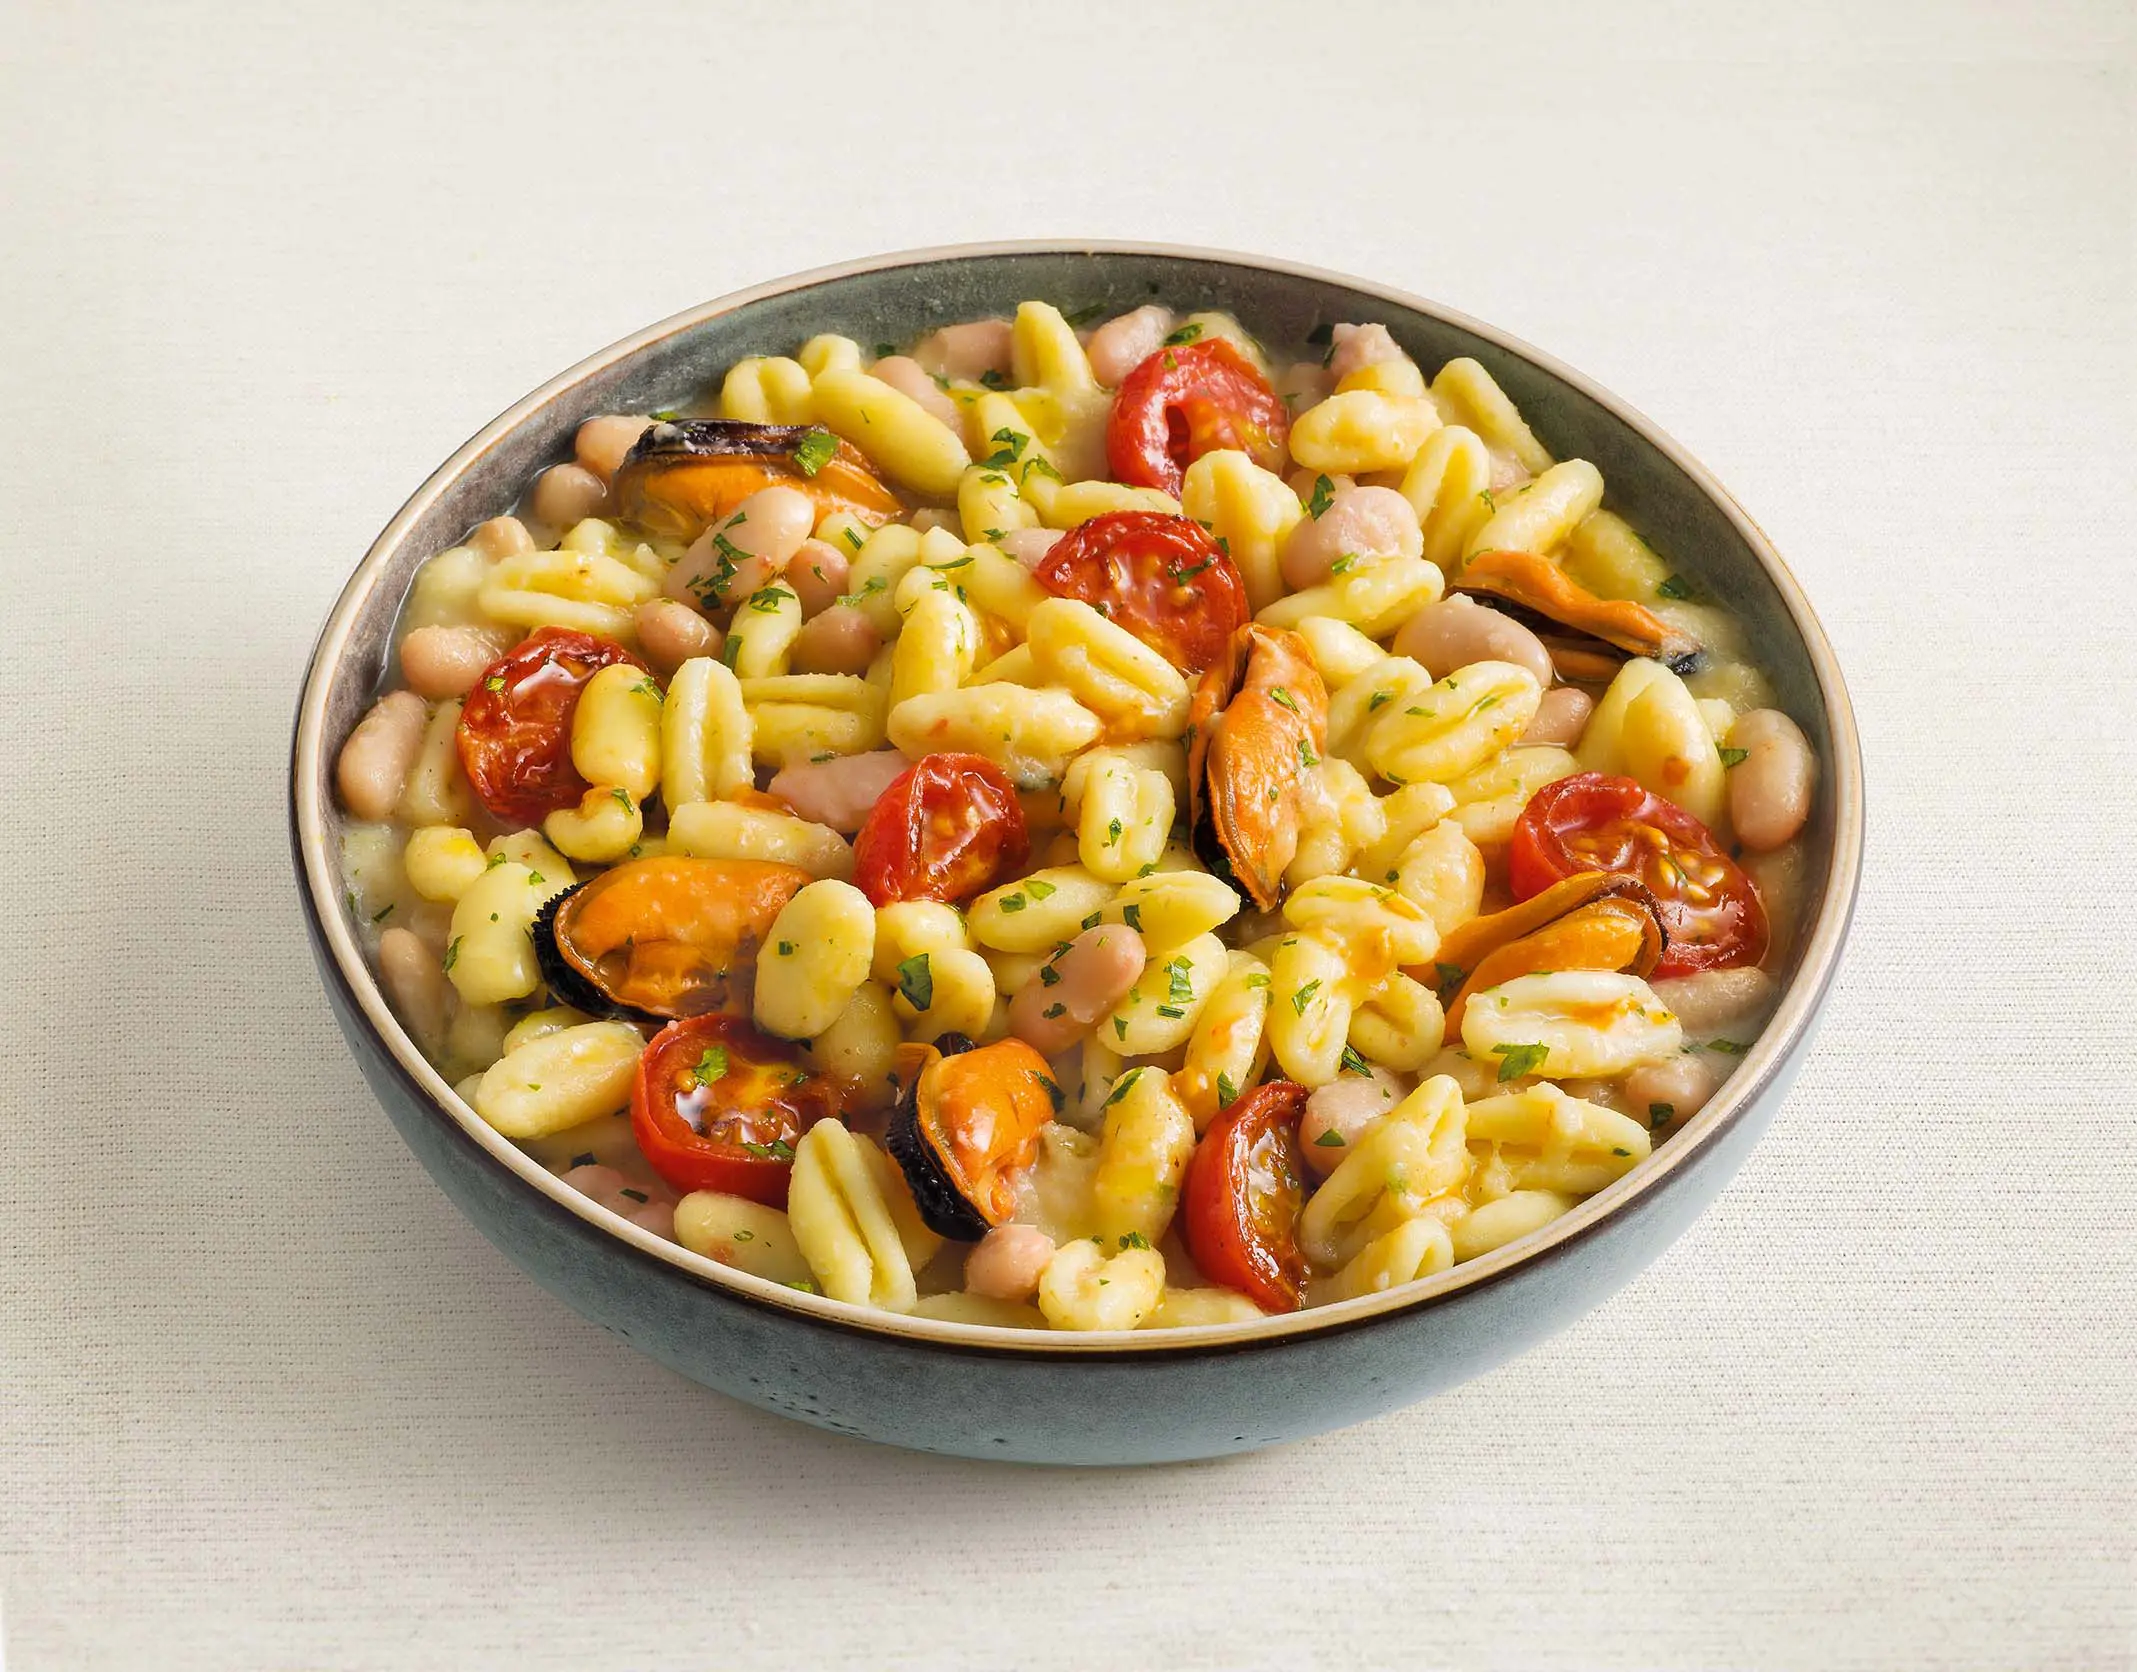 Cavatelli with beans and mussels